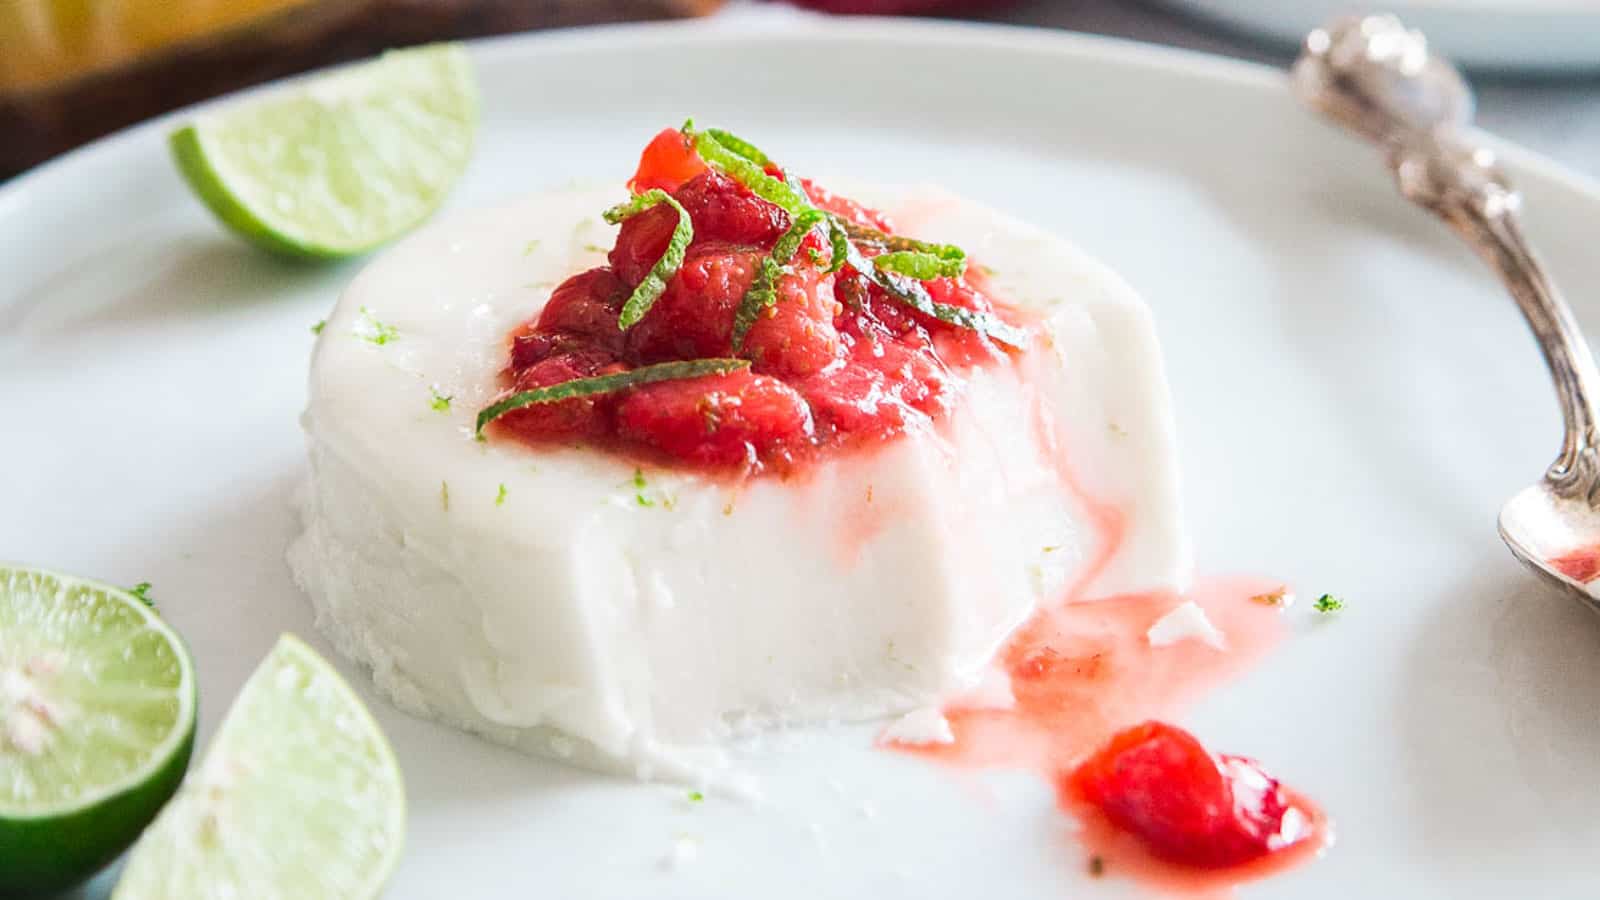 Key lime coconut panna cotta on a white plate topped with a strawberry lime compote.